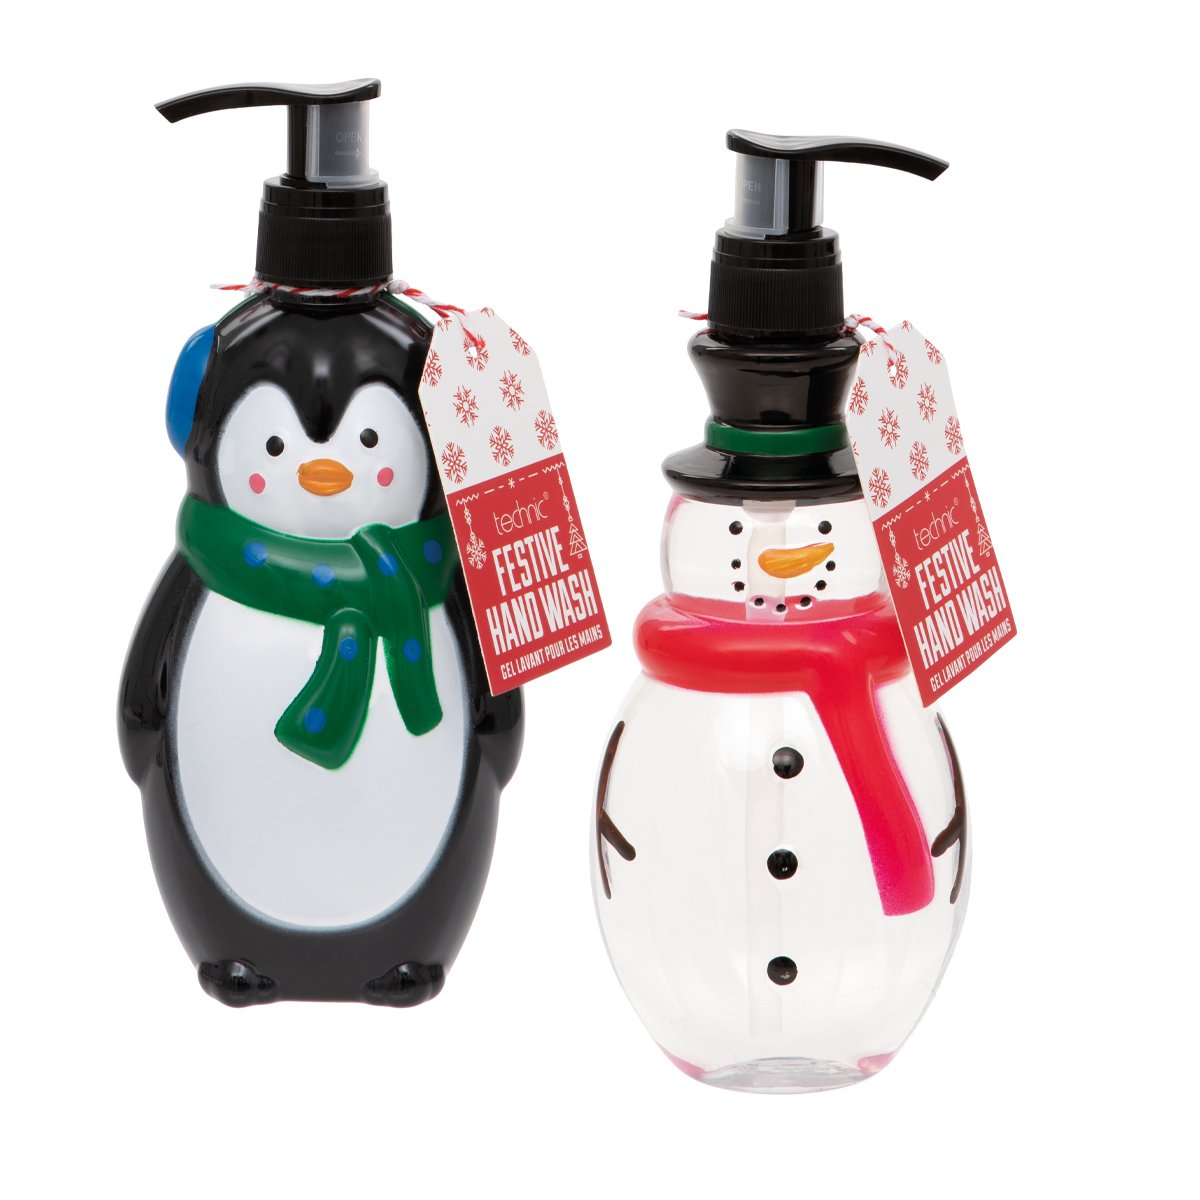 Technic Christmas Novelty Character Hand Washes